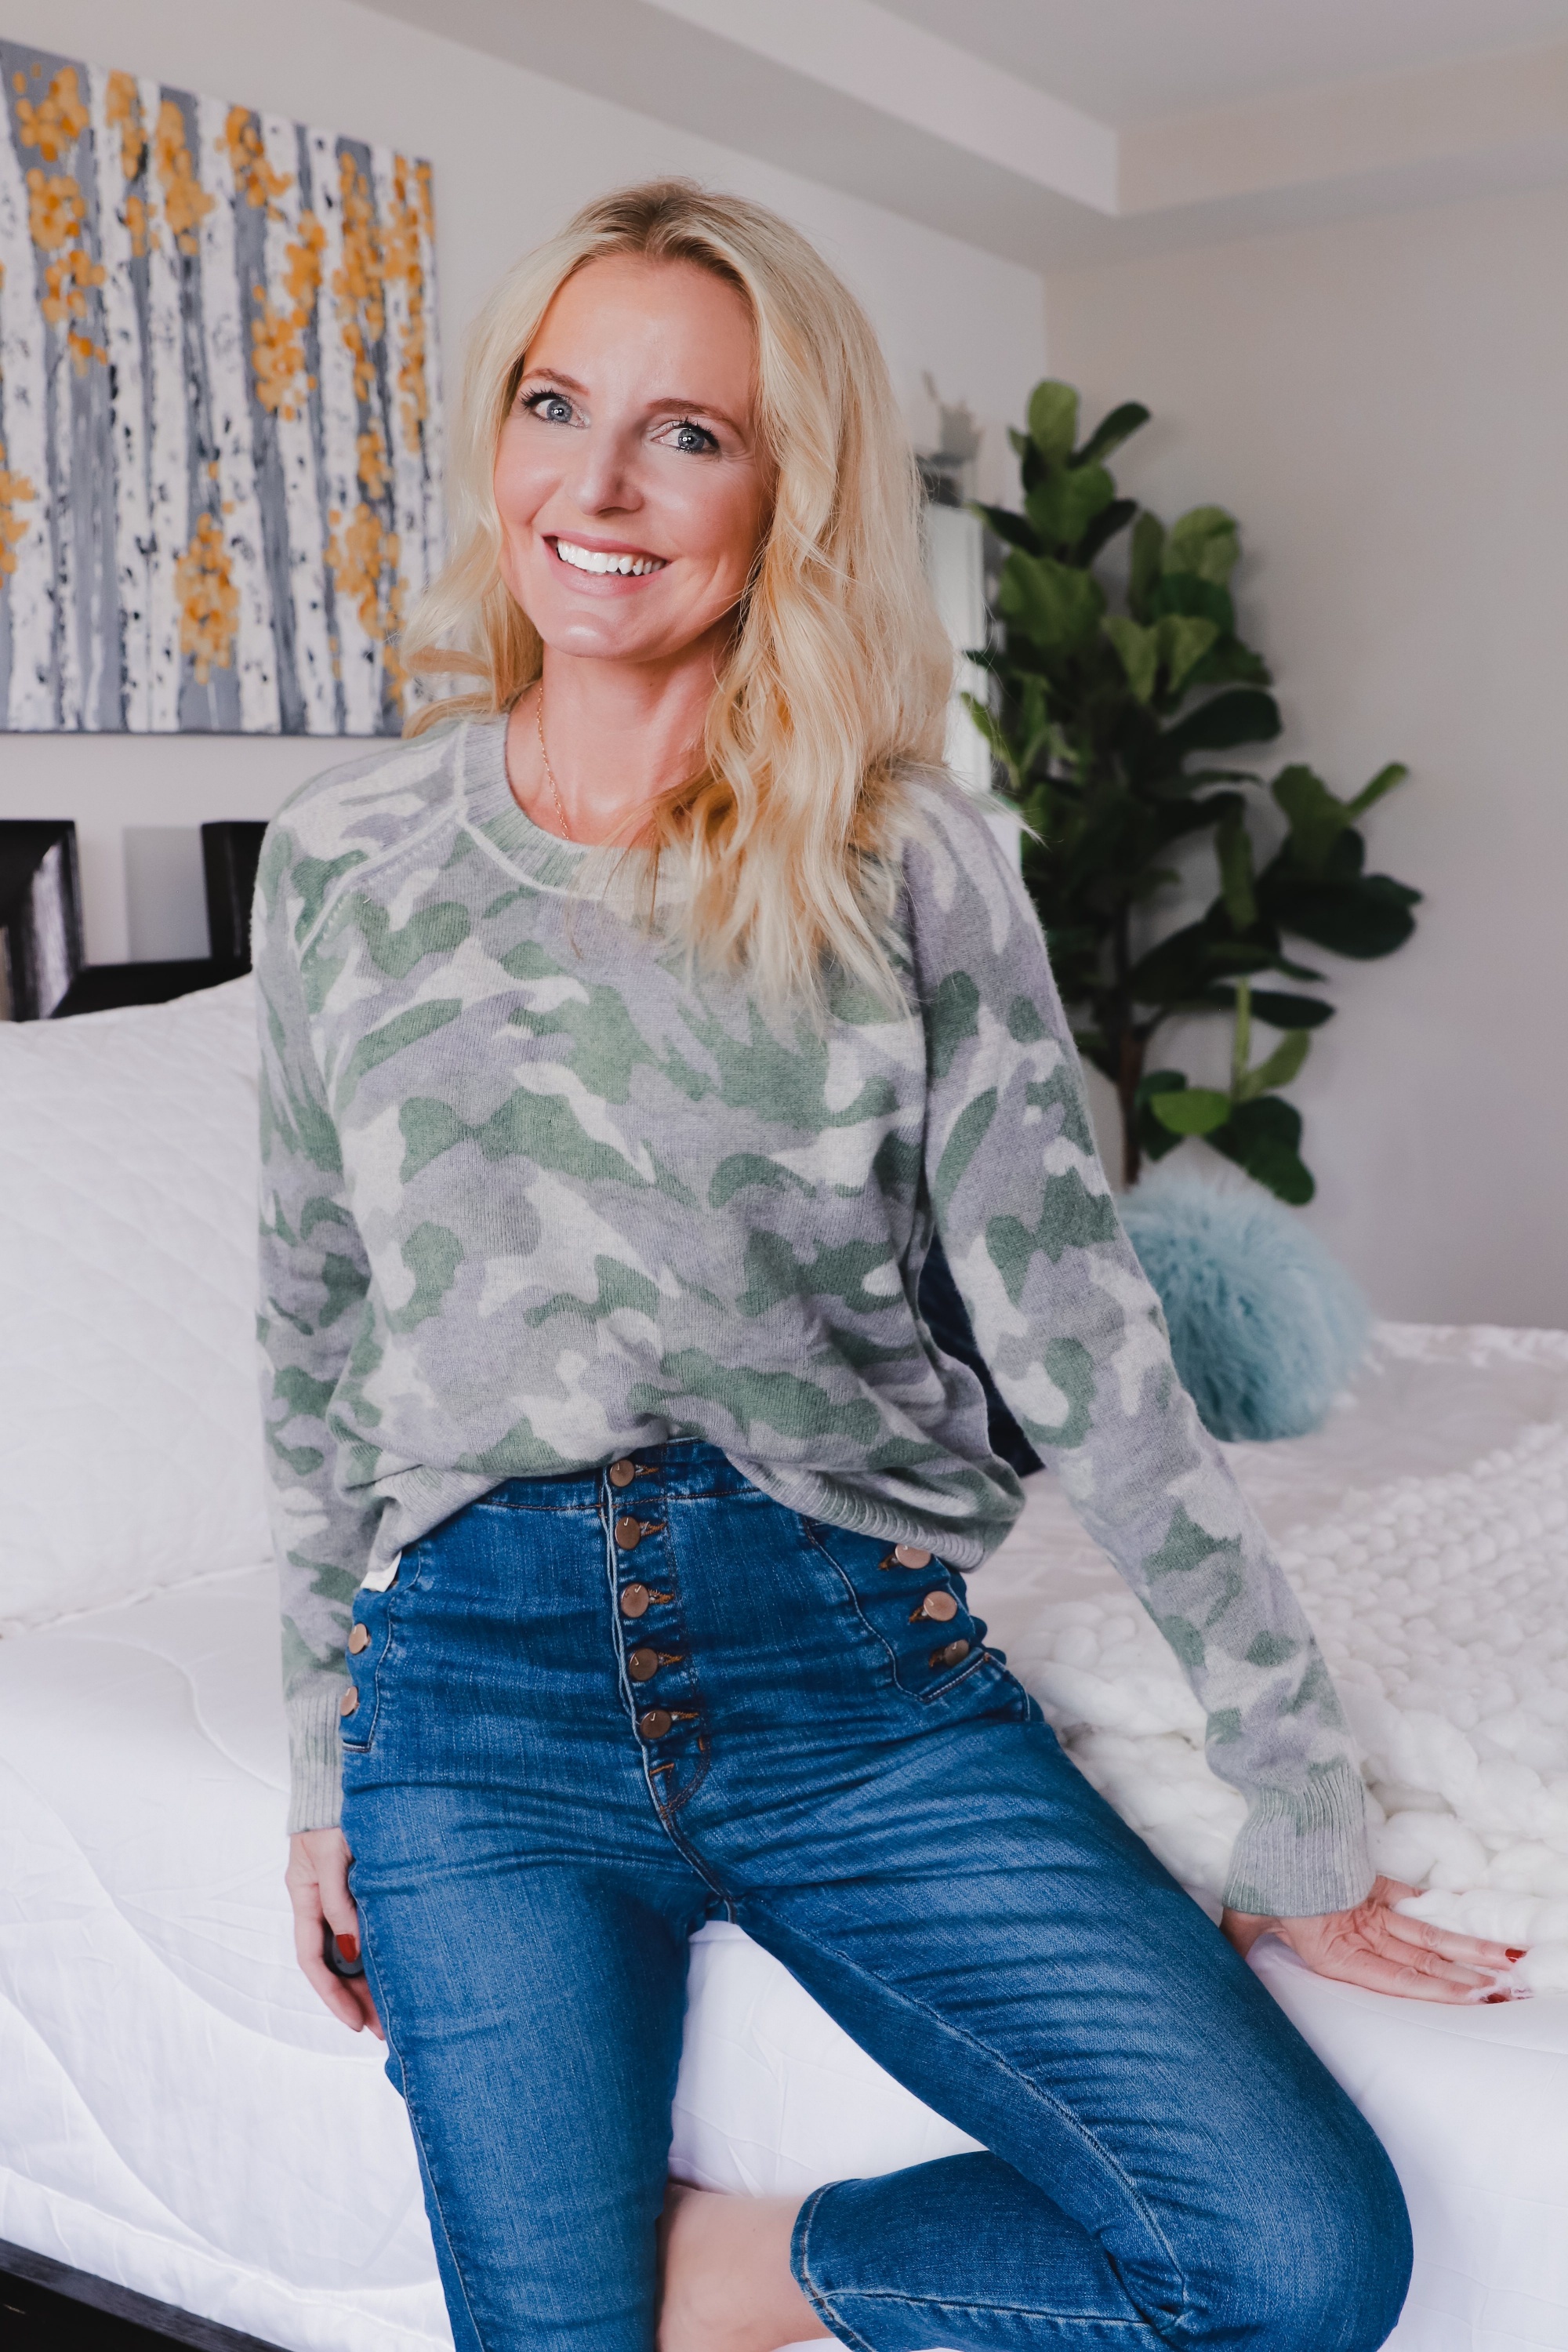 affordable women's cashmere sweaters, Aqua Cashmere Sweater, fashion blogger Busbee Style wearing green camo cashmere sweater with J Brand Natasha jeans